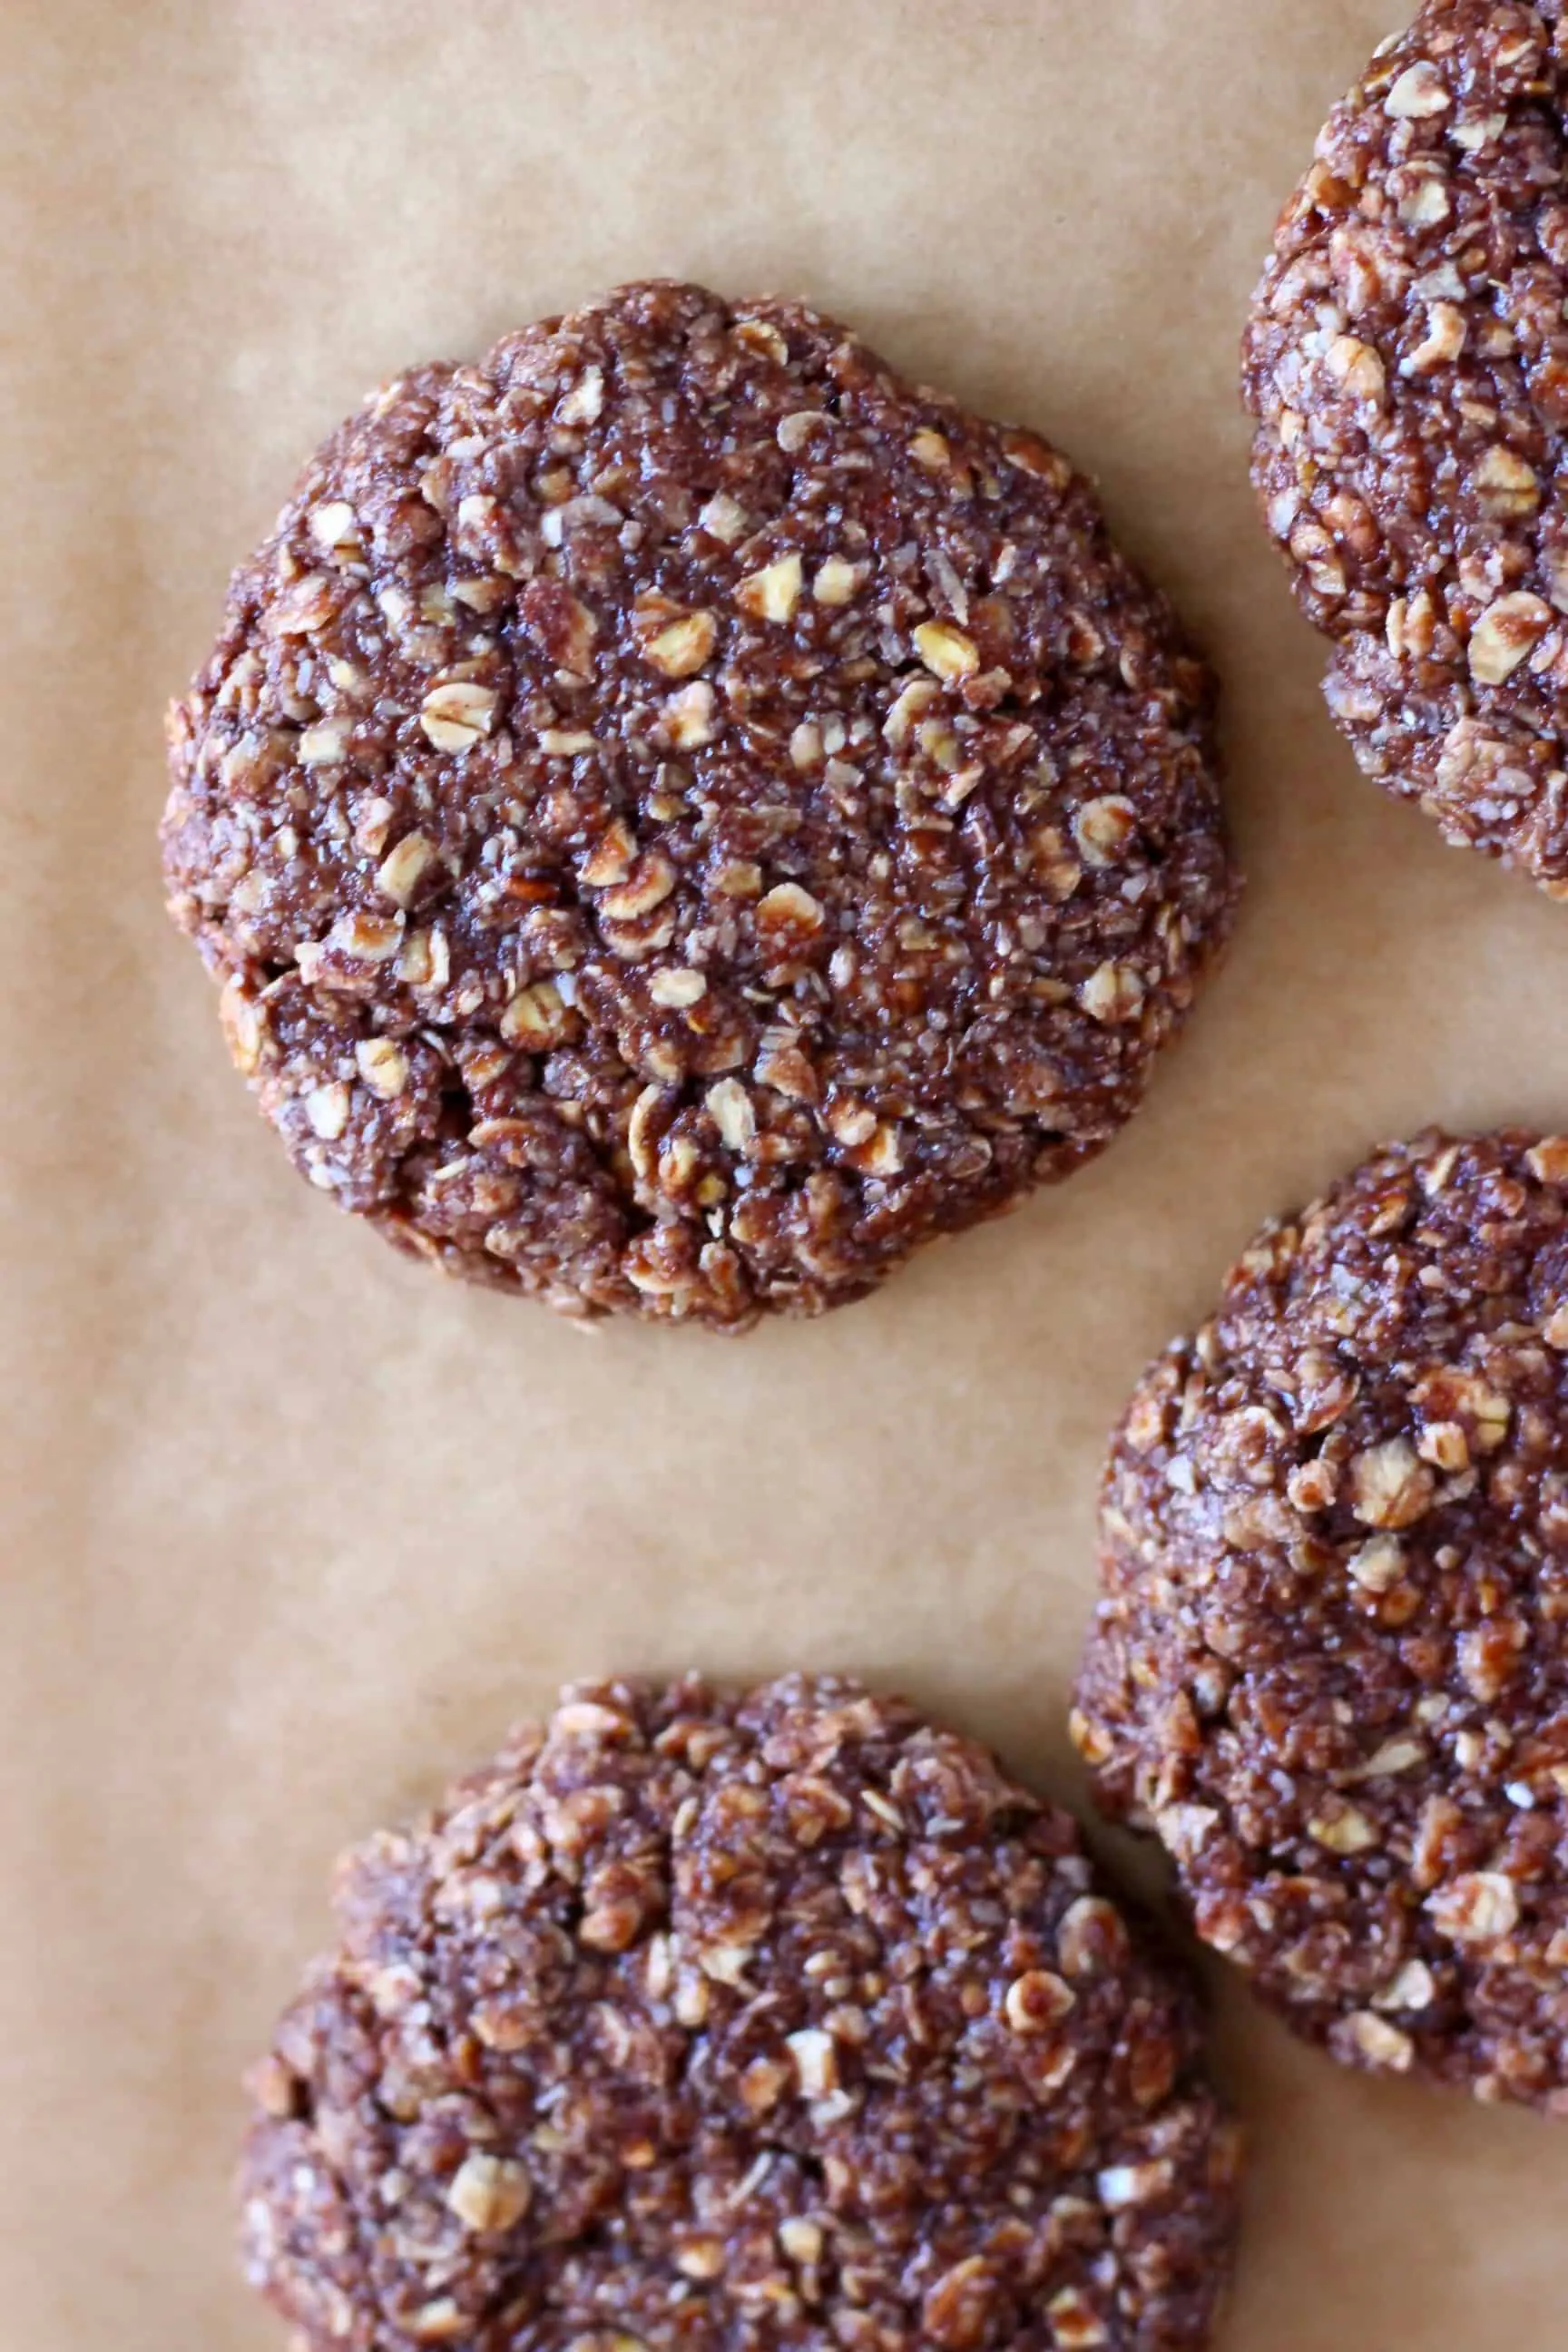 Four raw chocolate oatmeal cookies on a sheet of brown baking paper